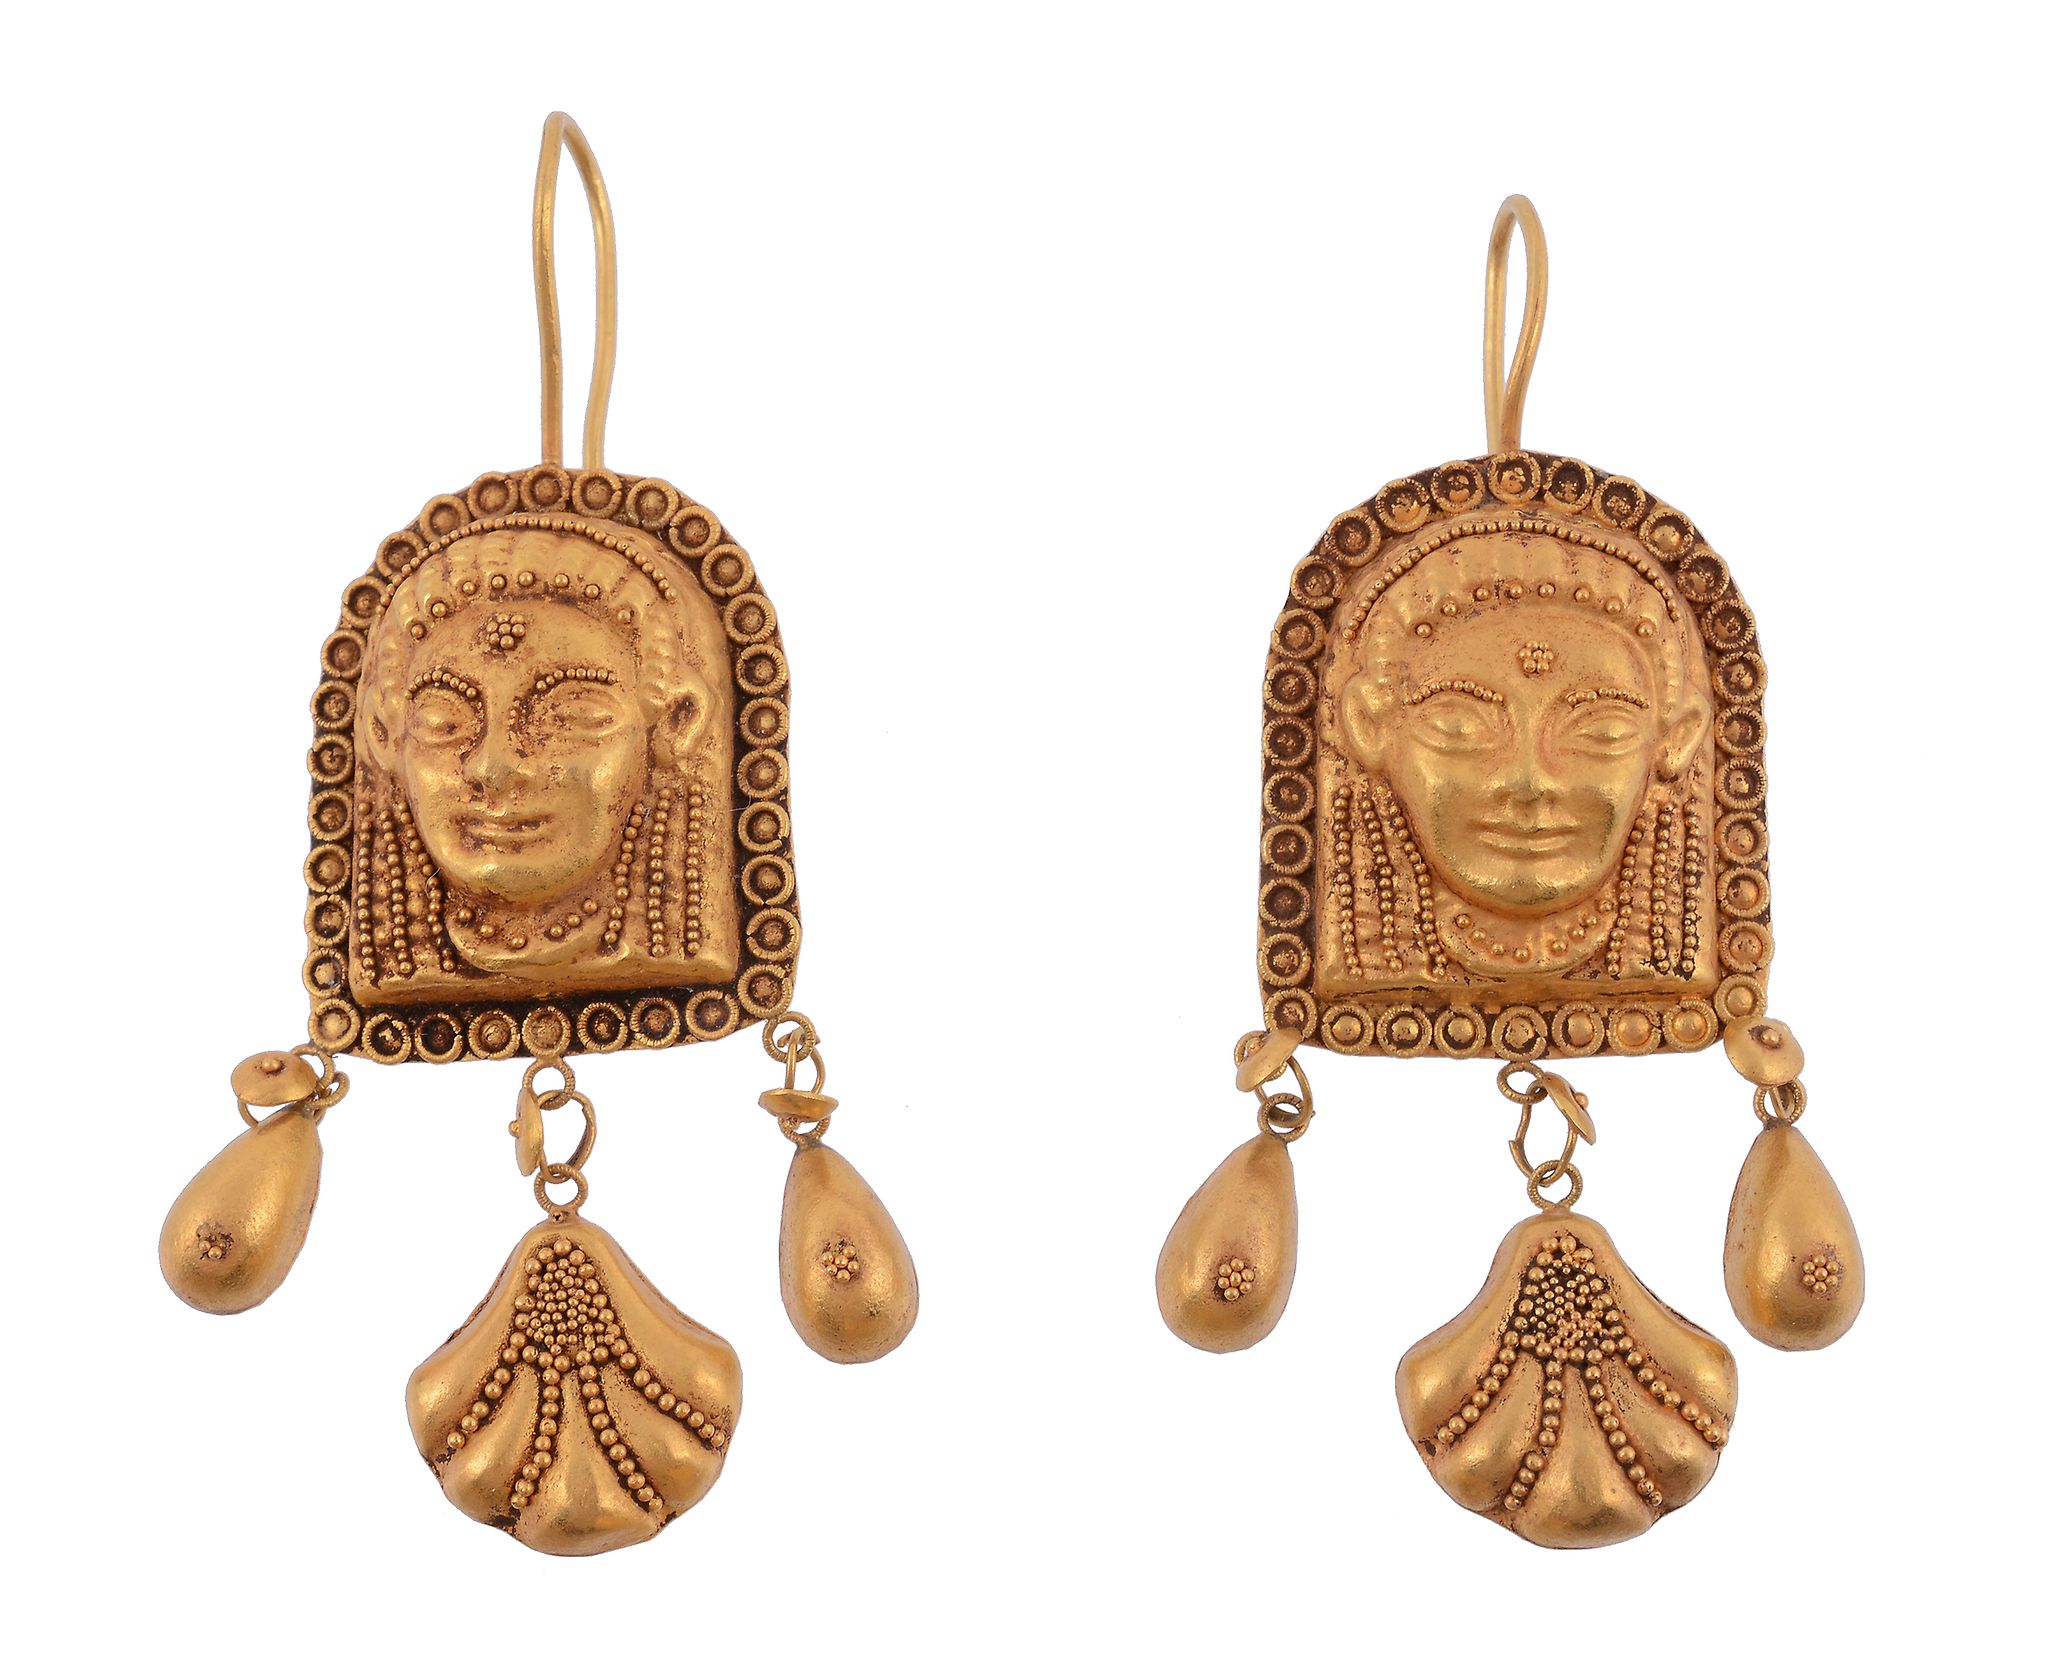 A pair of ancient style ear pendents  , each panel with a relief of a face with granulated